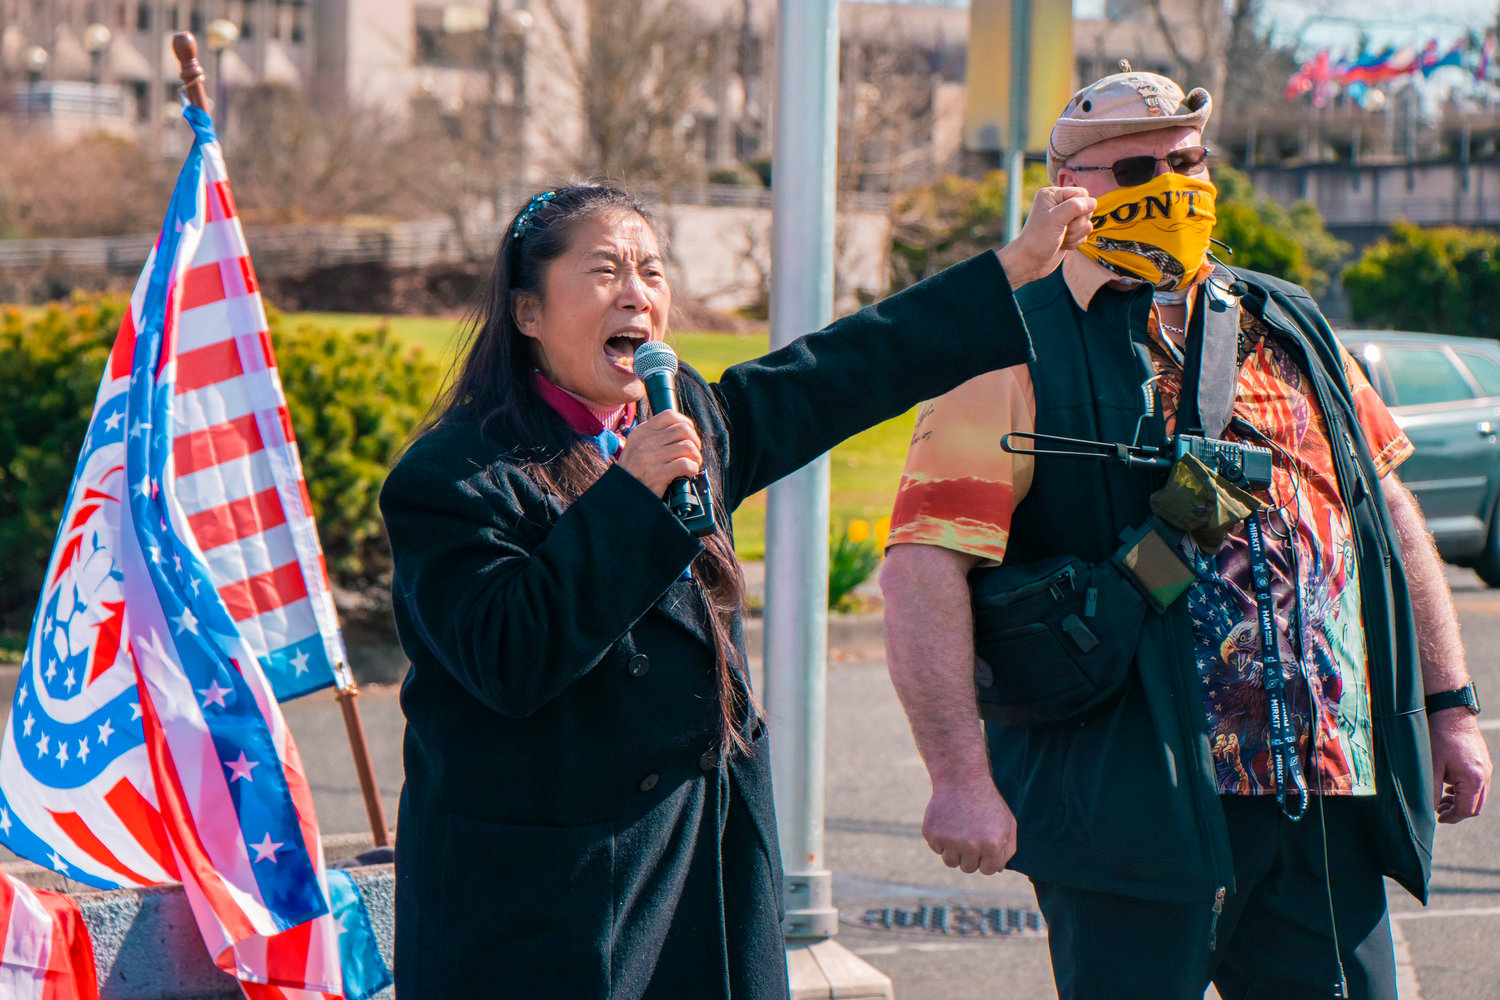 Jane Xiuhong Jin yells ‘Down with the C.C.P,’ during a rally in support of open carry rights near the Washington State Capitol in Olympia on Saturday.